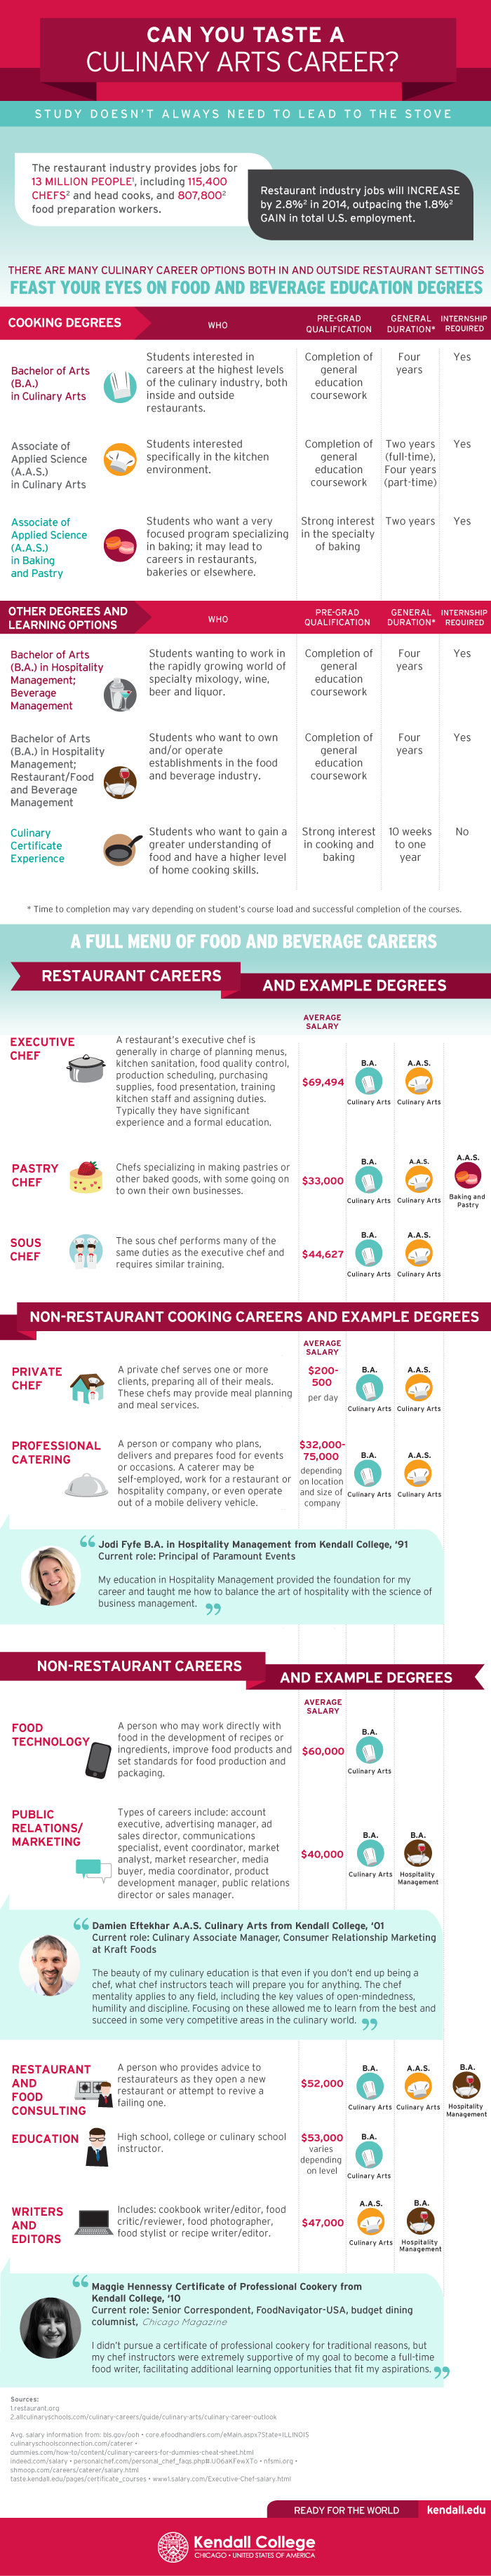 Culinary arts career infographic